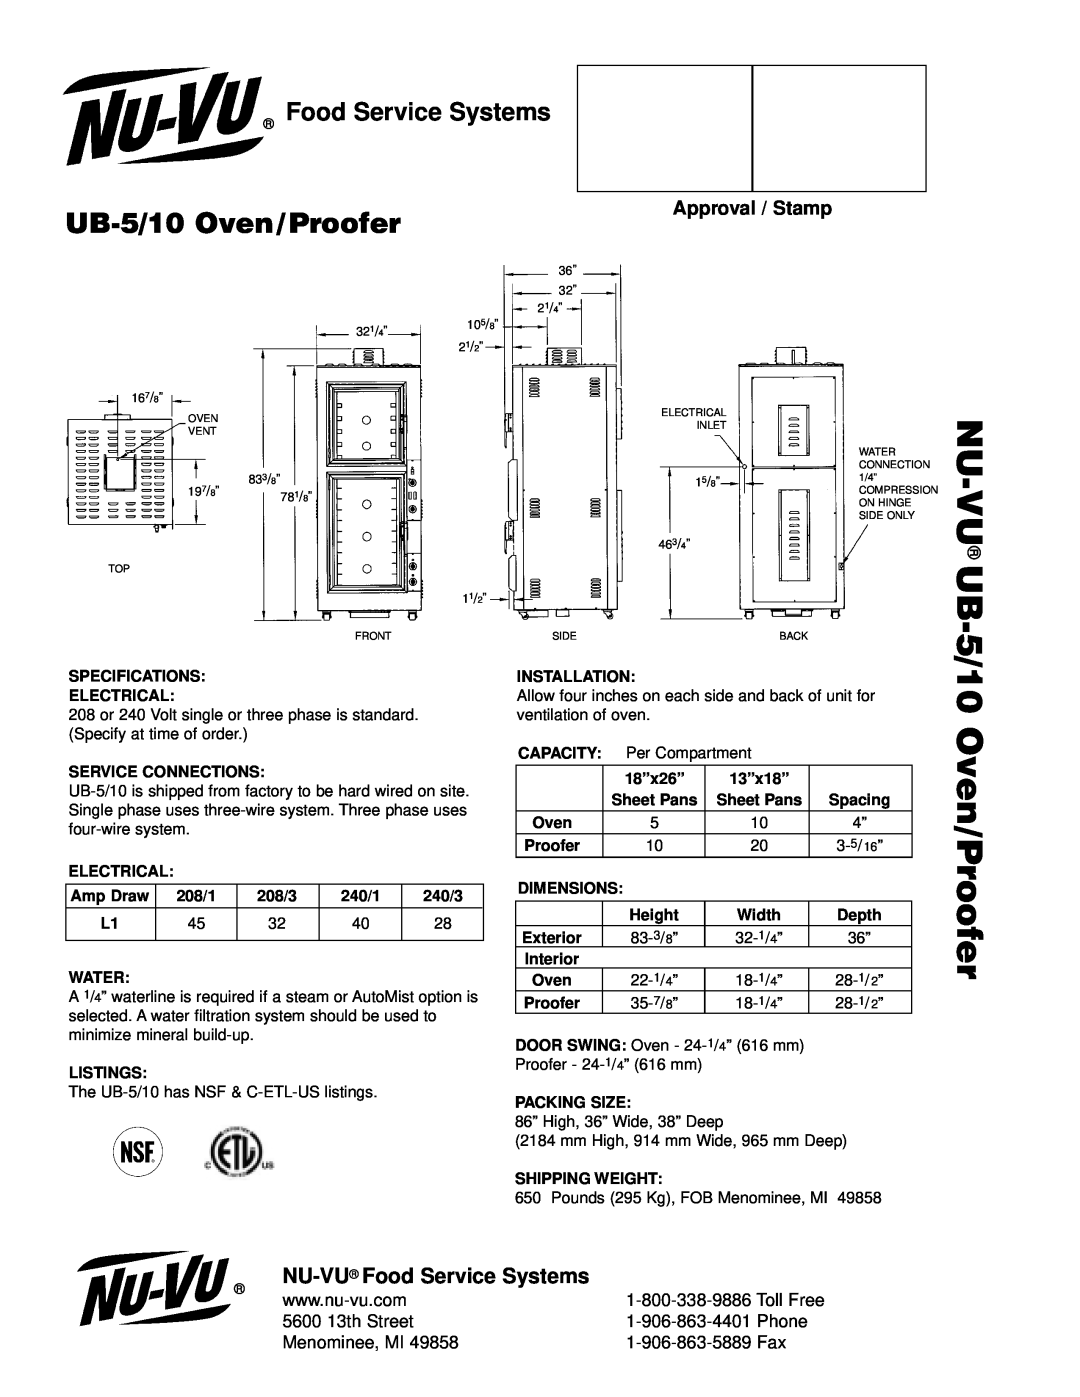 Middleby Cooking Systems Group UB 5/10 manual Nu-Vu Ub, 5/10 Oven/Proofer, UB-5/10Oven/Proofer, Food Service Systems, Phone 